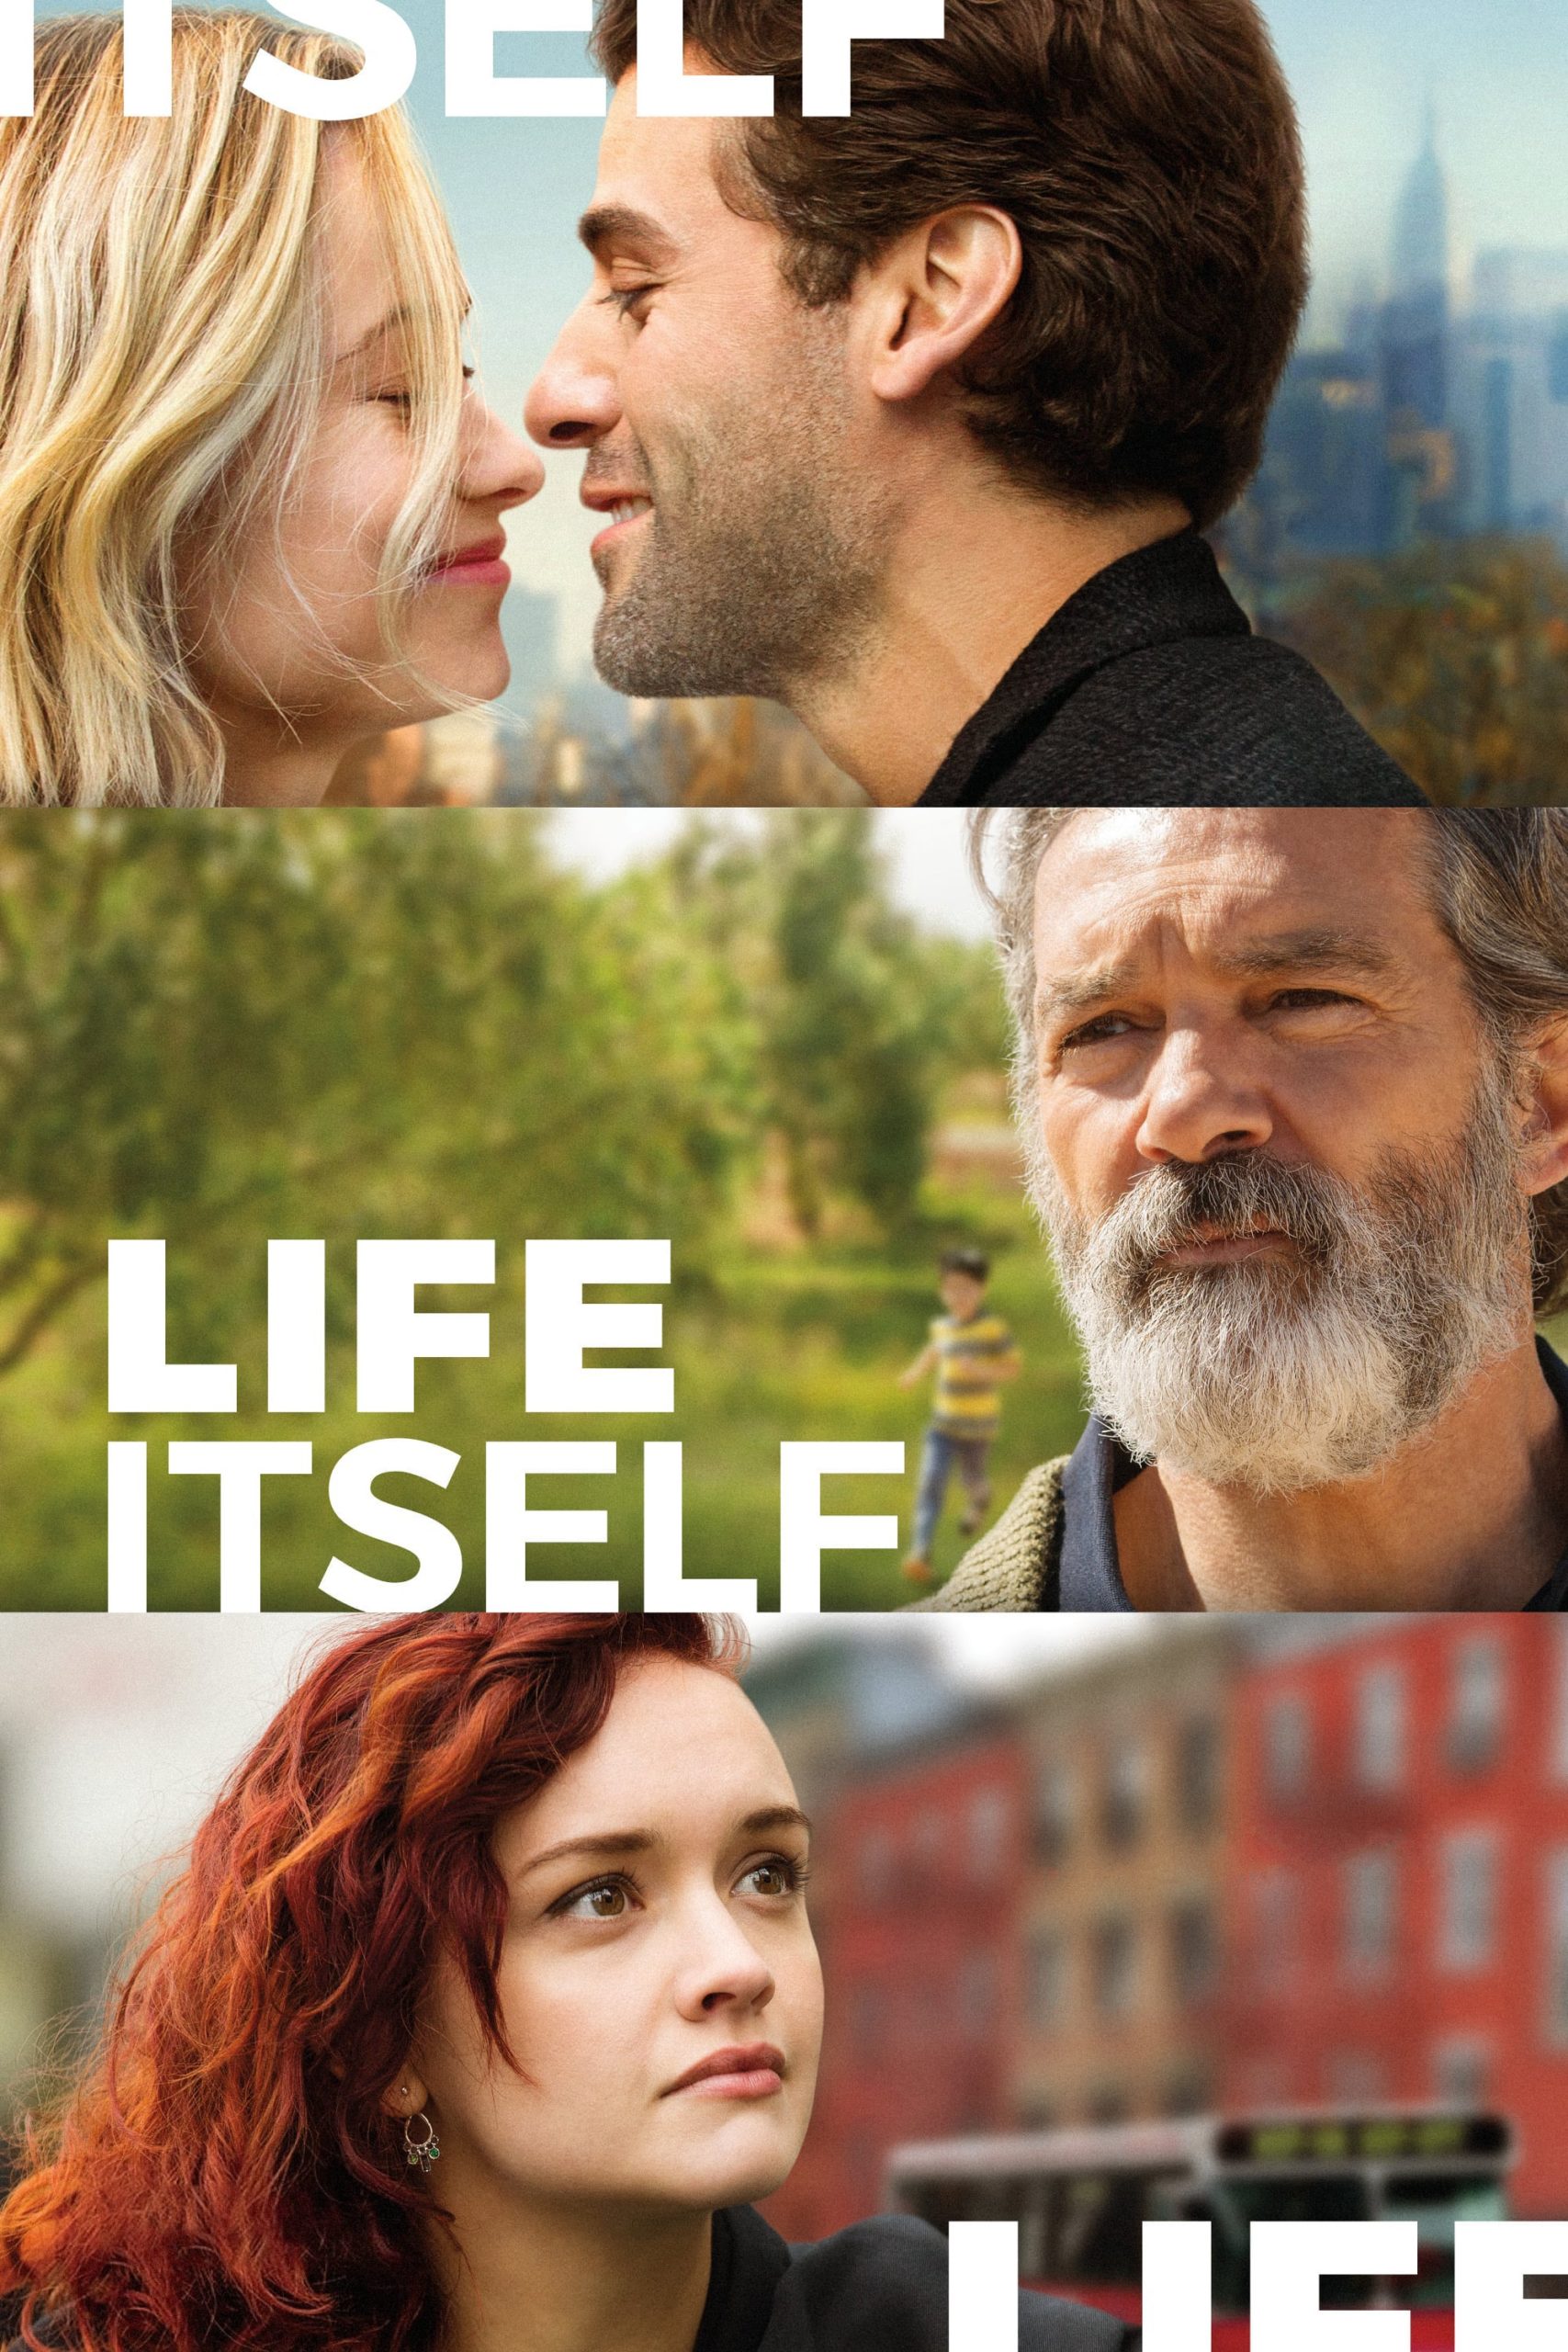 Poster for the movie "Life Itself"